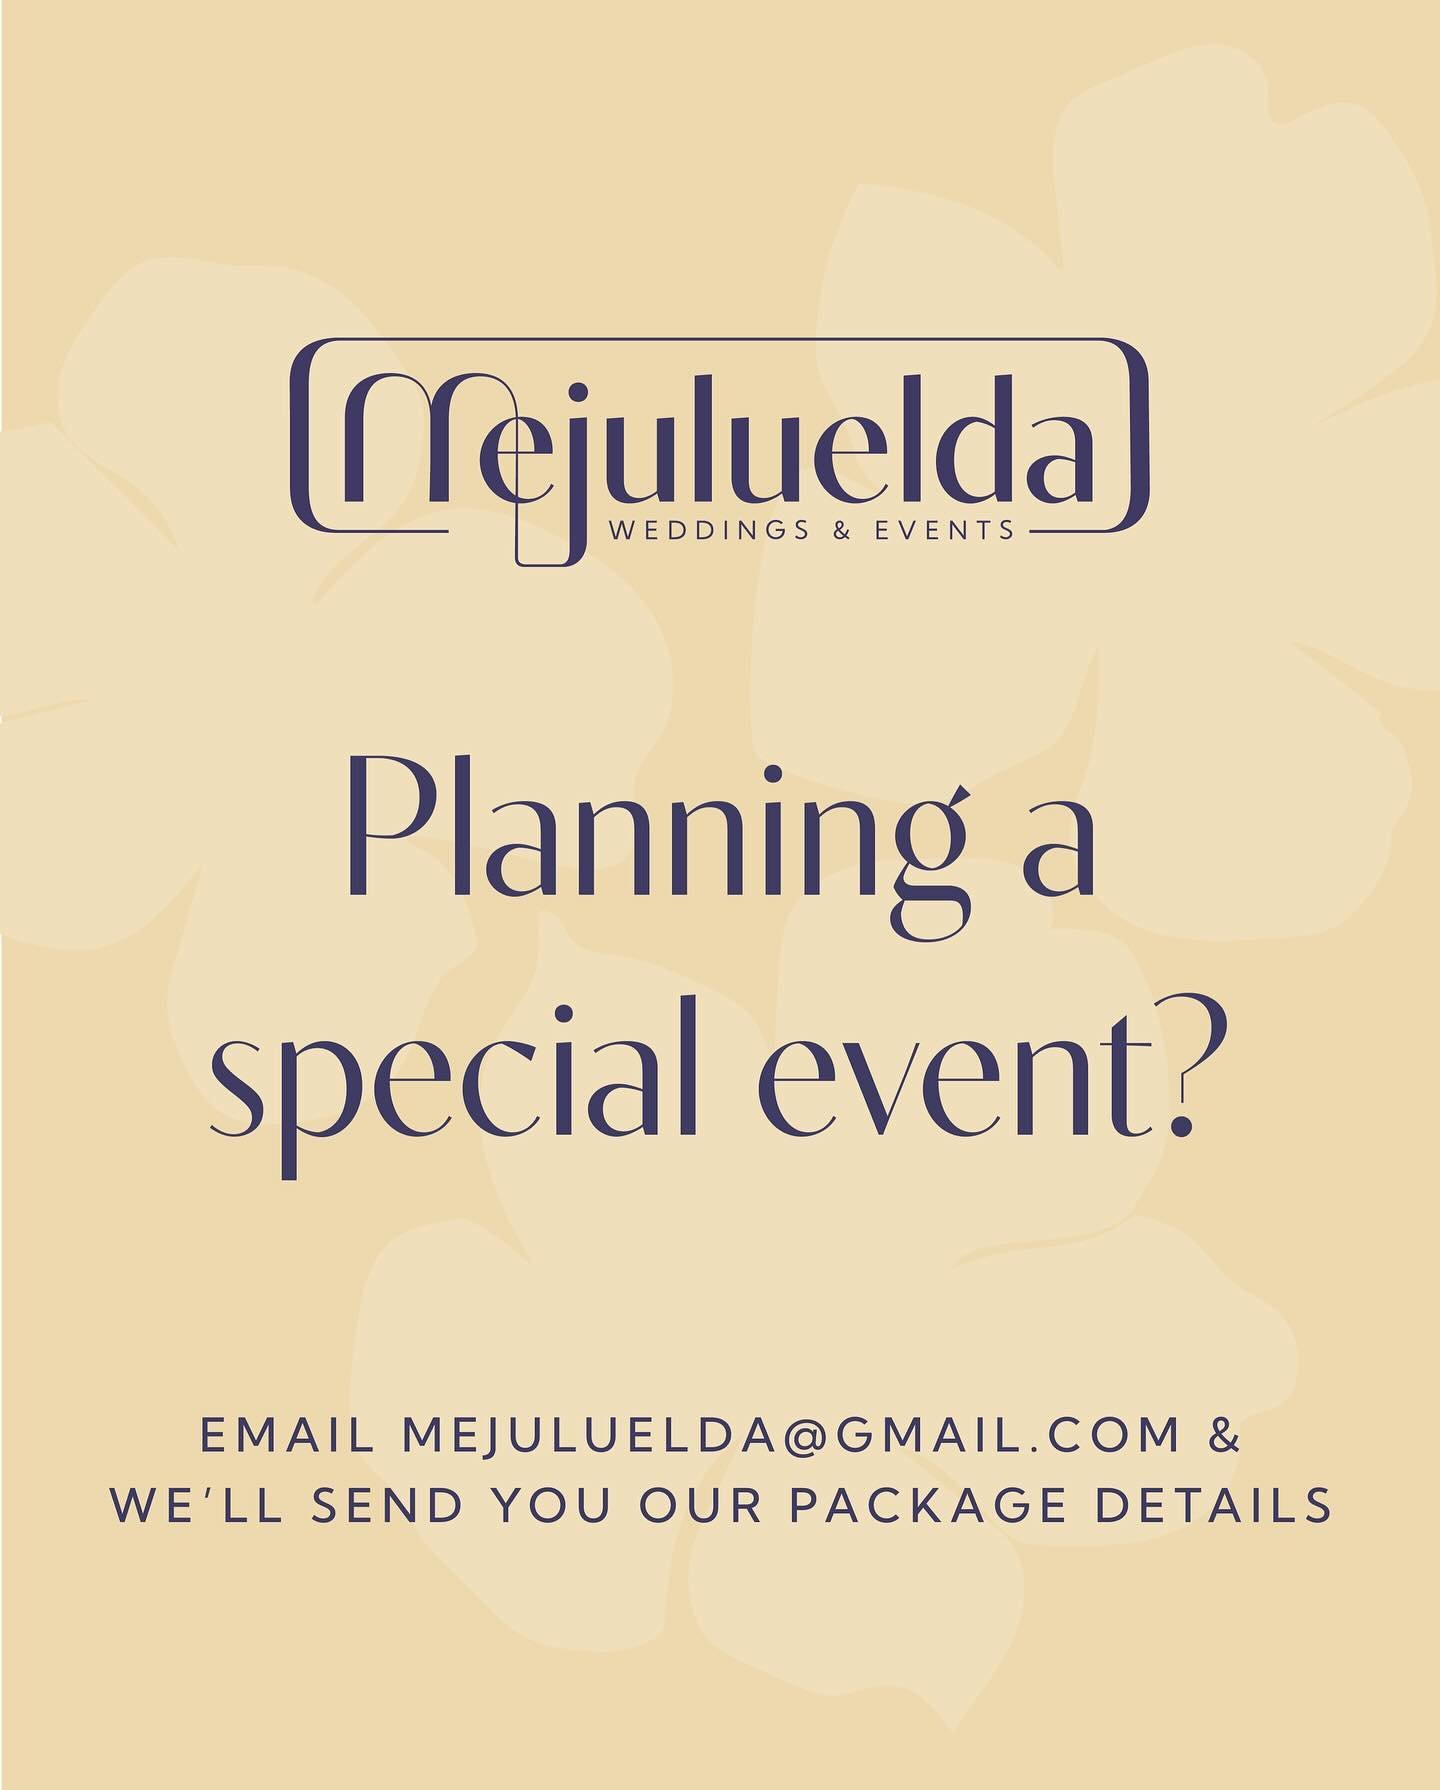 If you&rsquo;ve been searching for the perfect event space we&rsquo;d love to show you what&rsquo;s on offer at Mejuluelda.

For enquiries or to receive our package details email&nbsp;mejuluelda@gmail.com,&nbsp;or call Sue on 0428 653119 to make an a